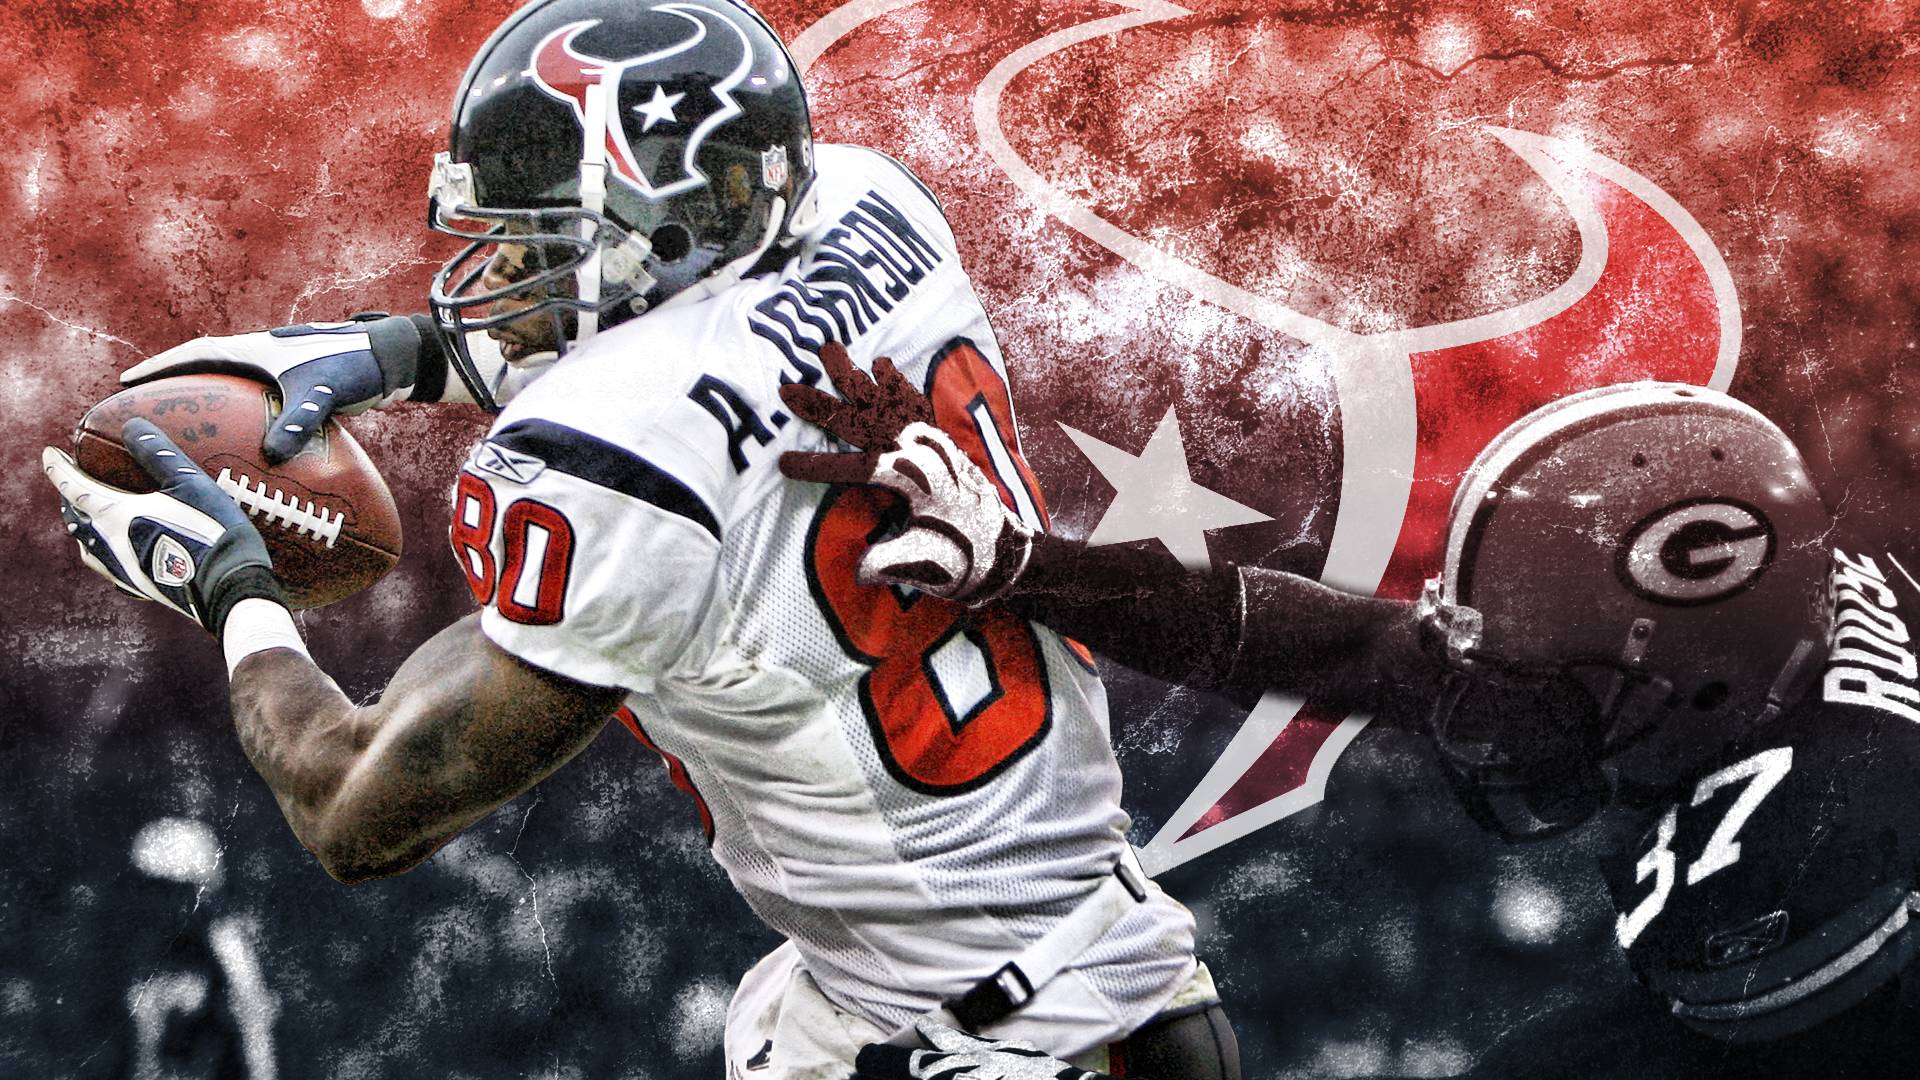 Nfl Houston Texans Andre Johnson Wallpapers 1920x1080 px Free